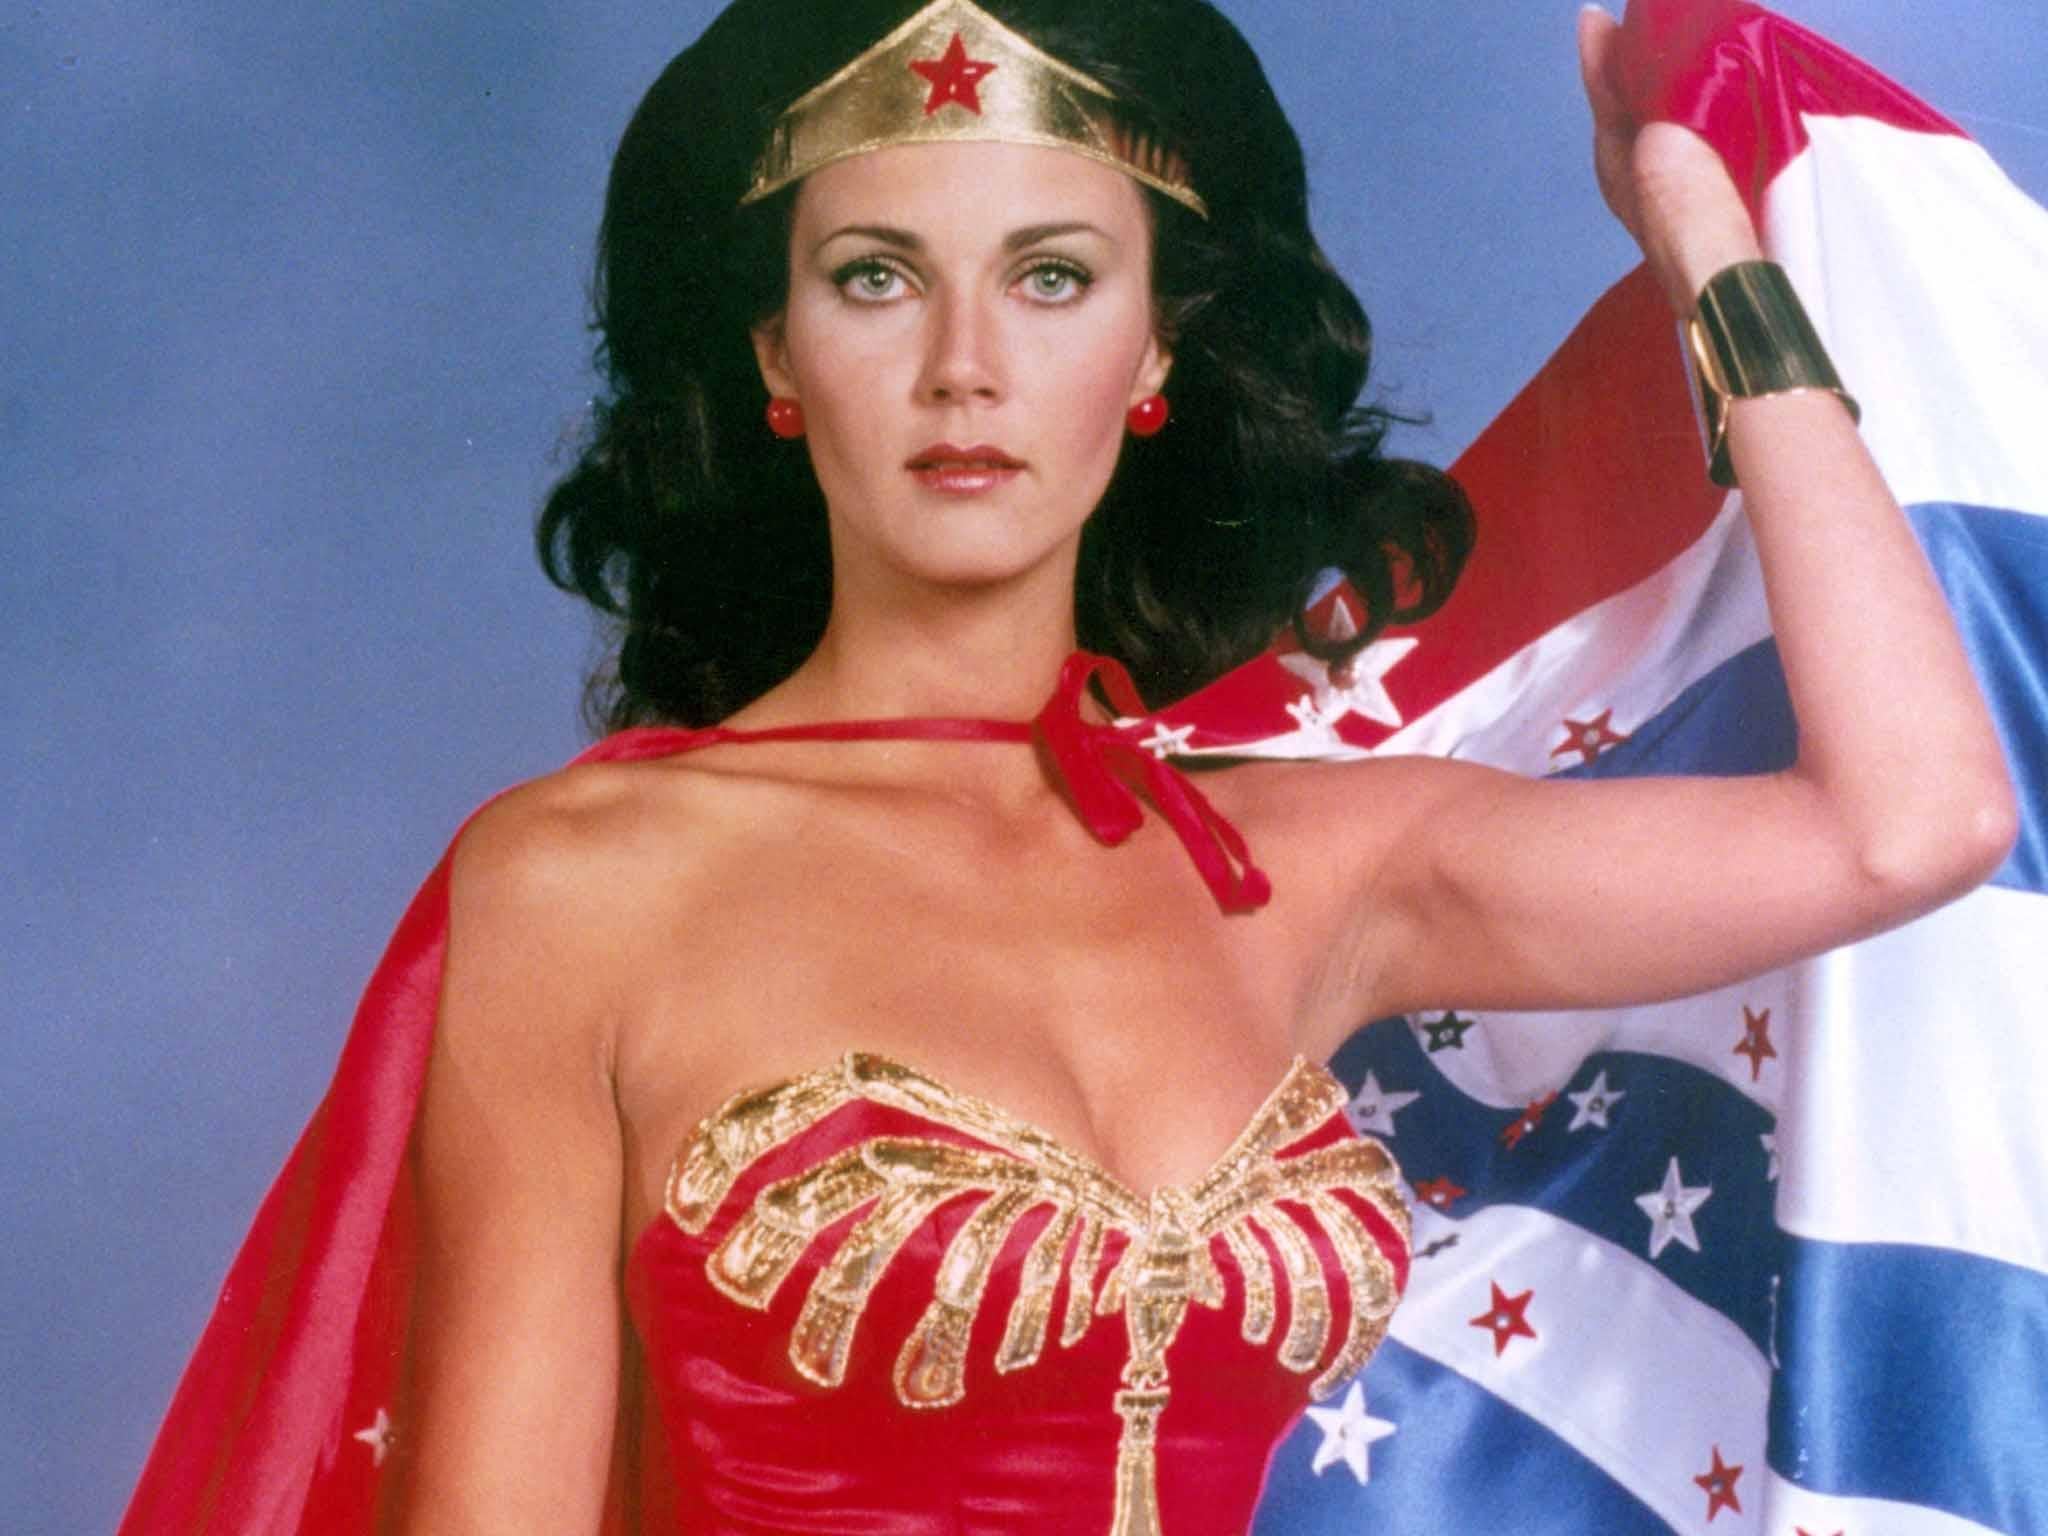 Lynda Carter starred as Wonder Woman in the late 1970s